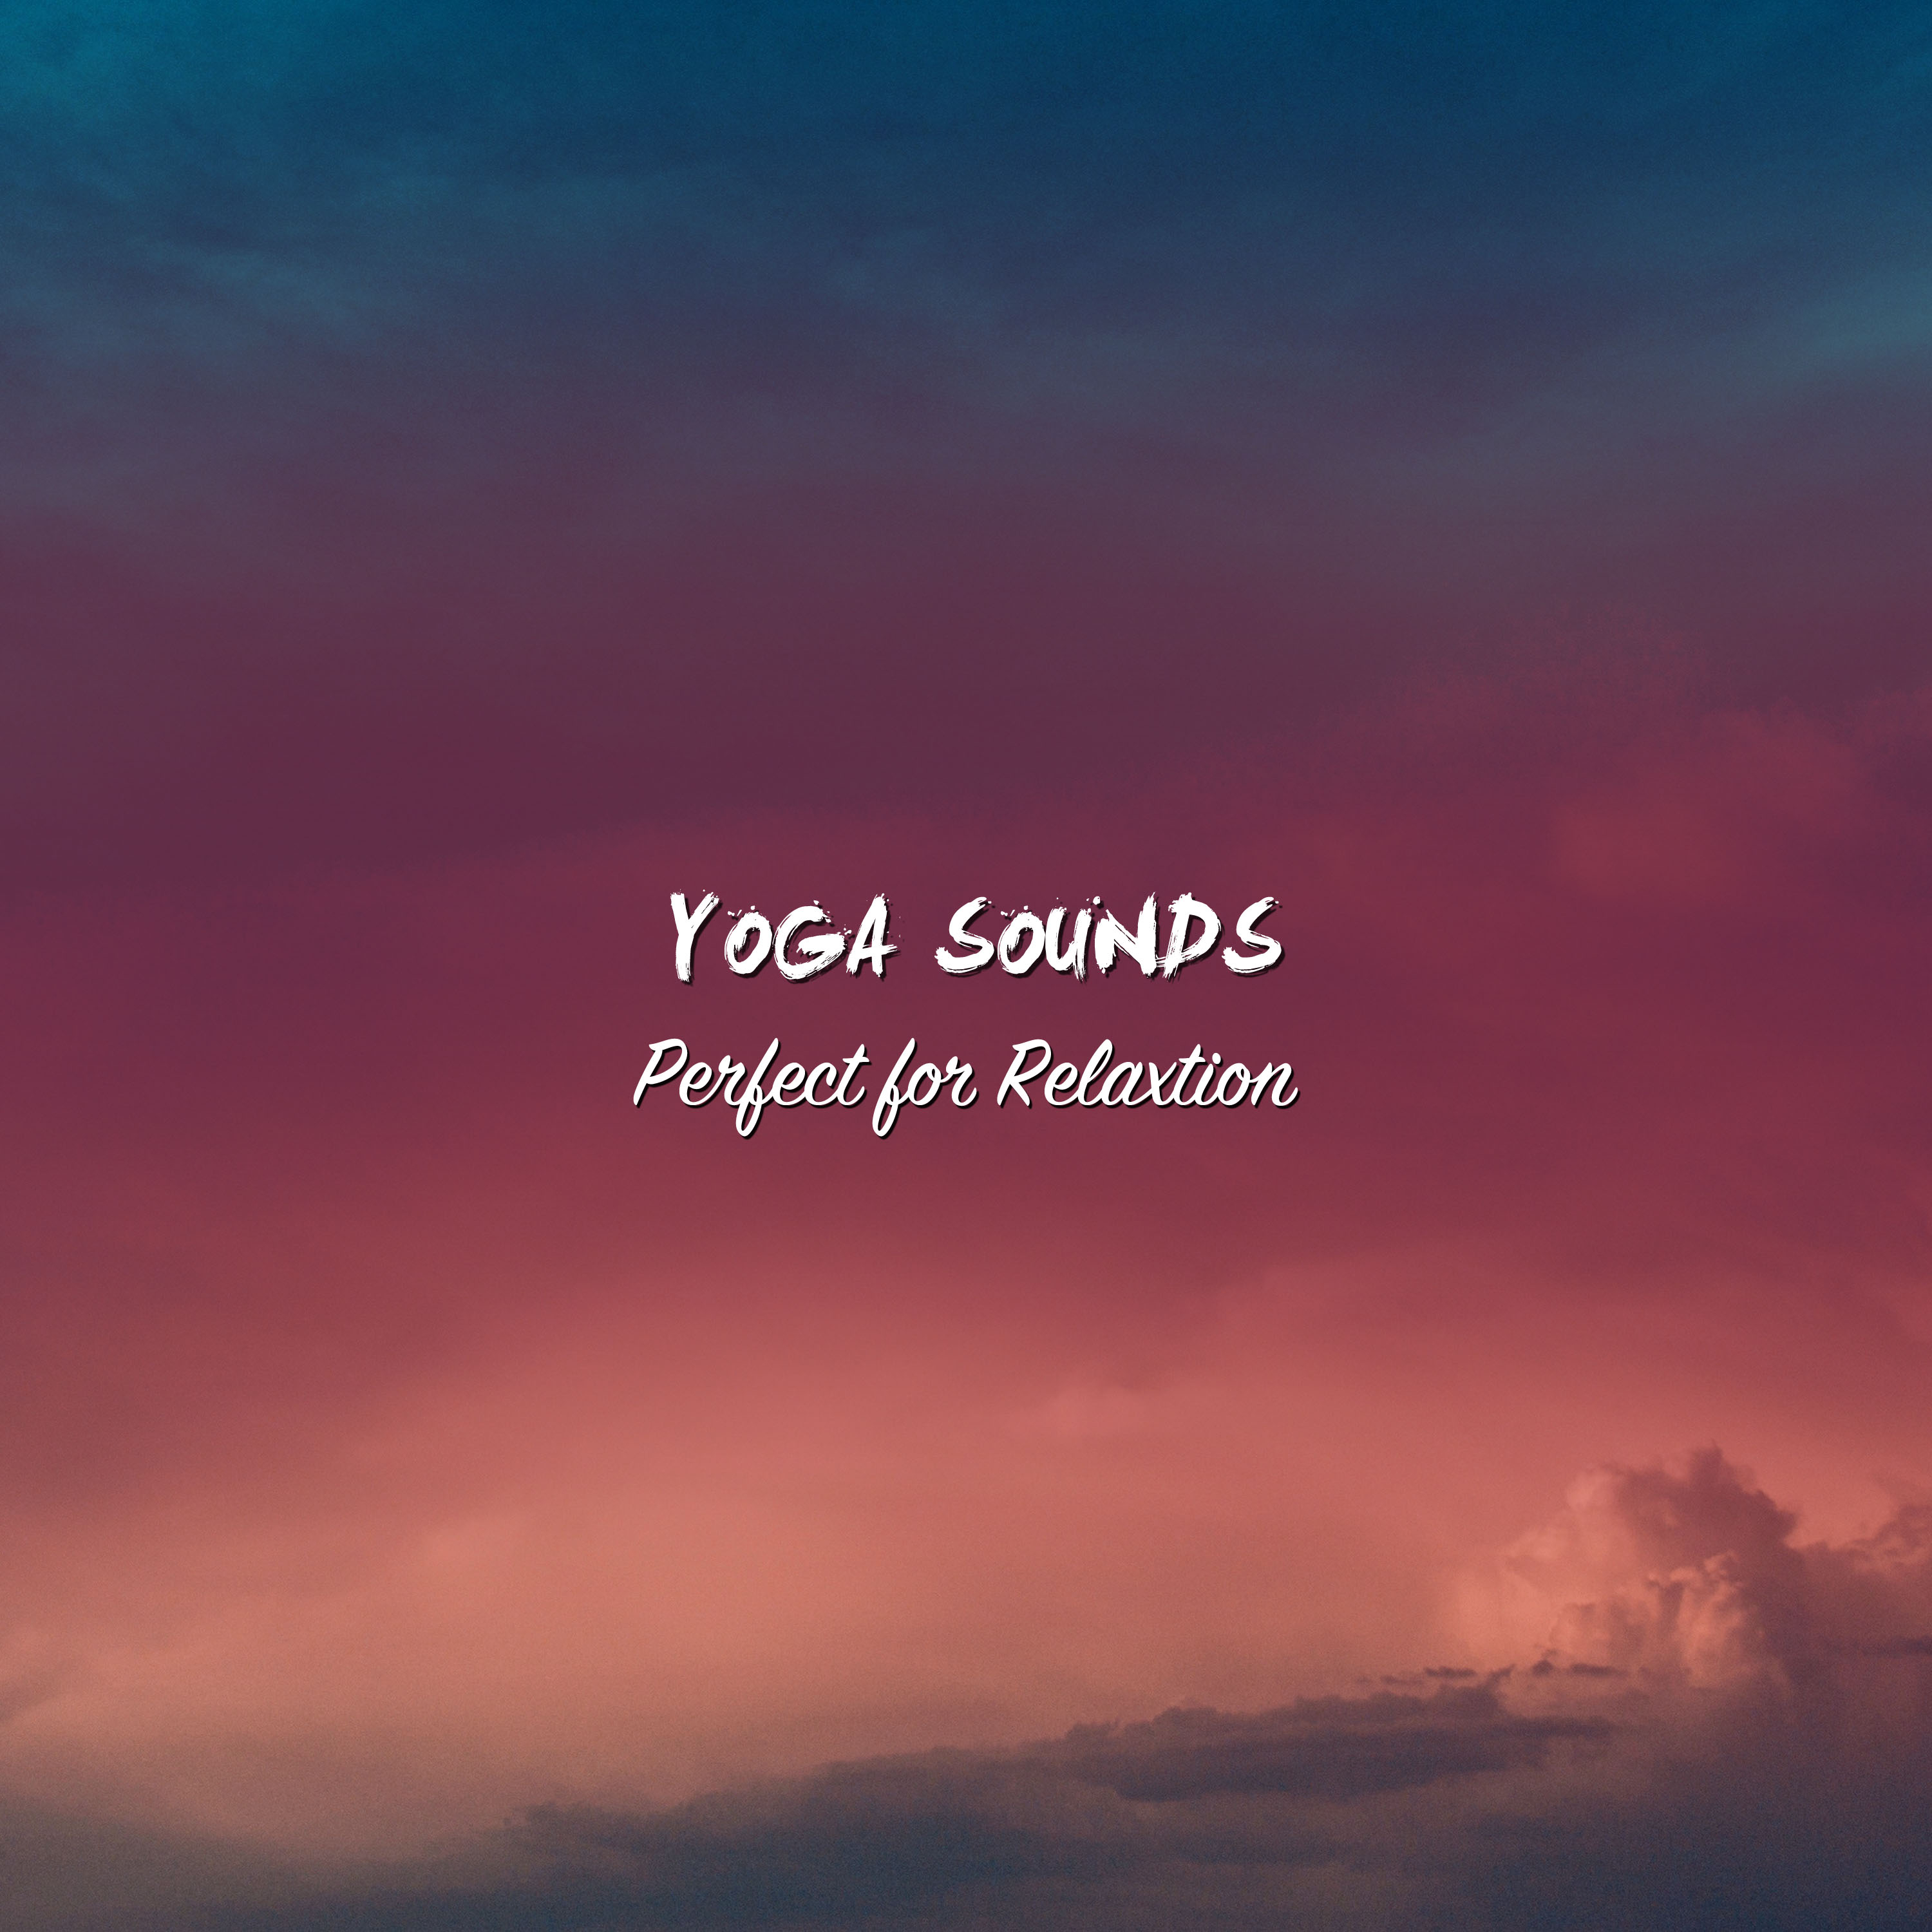 14 Yoga Sounds - Perfect for Relaxation